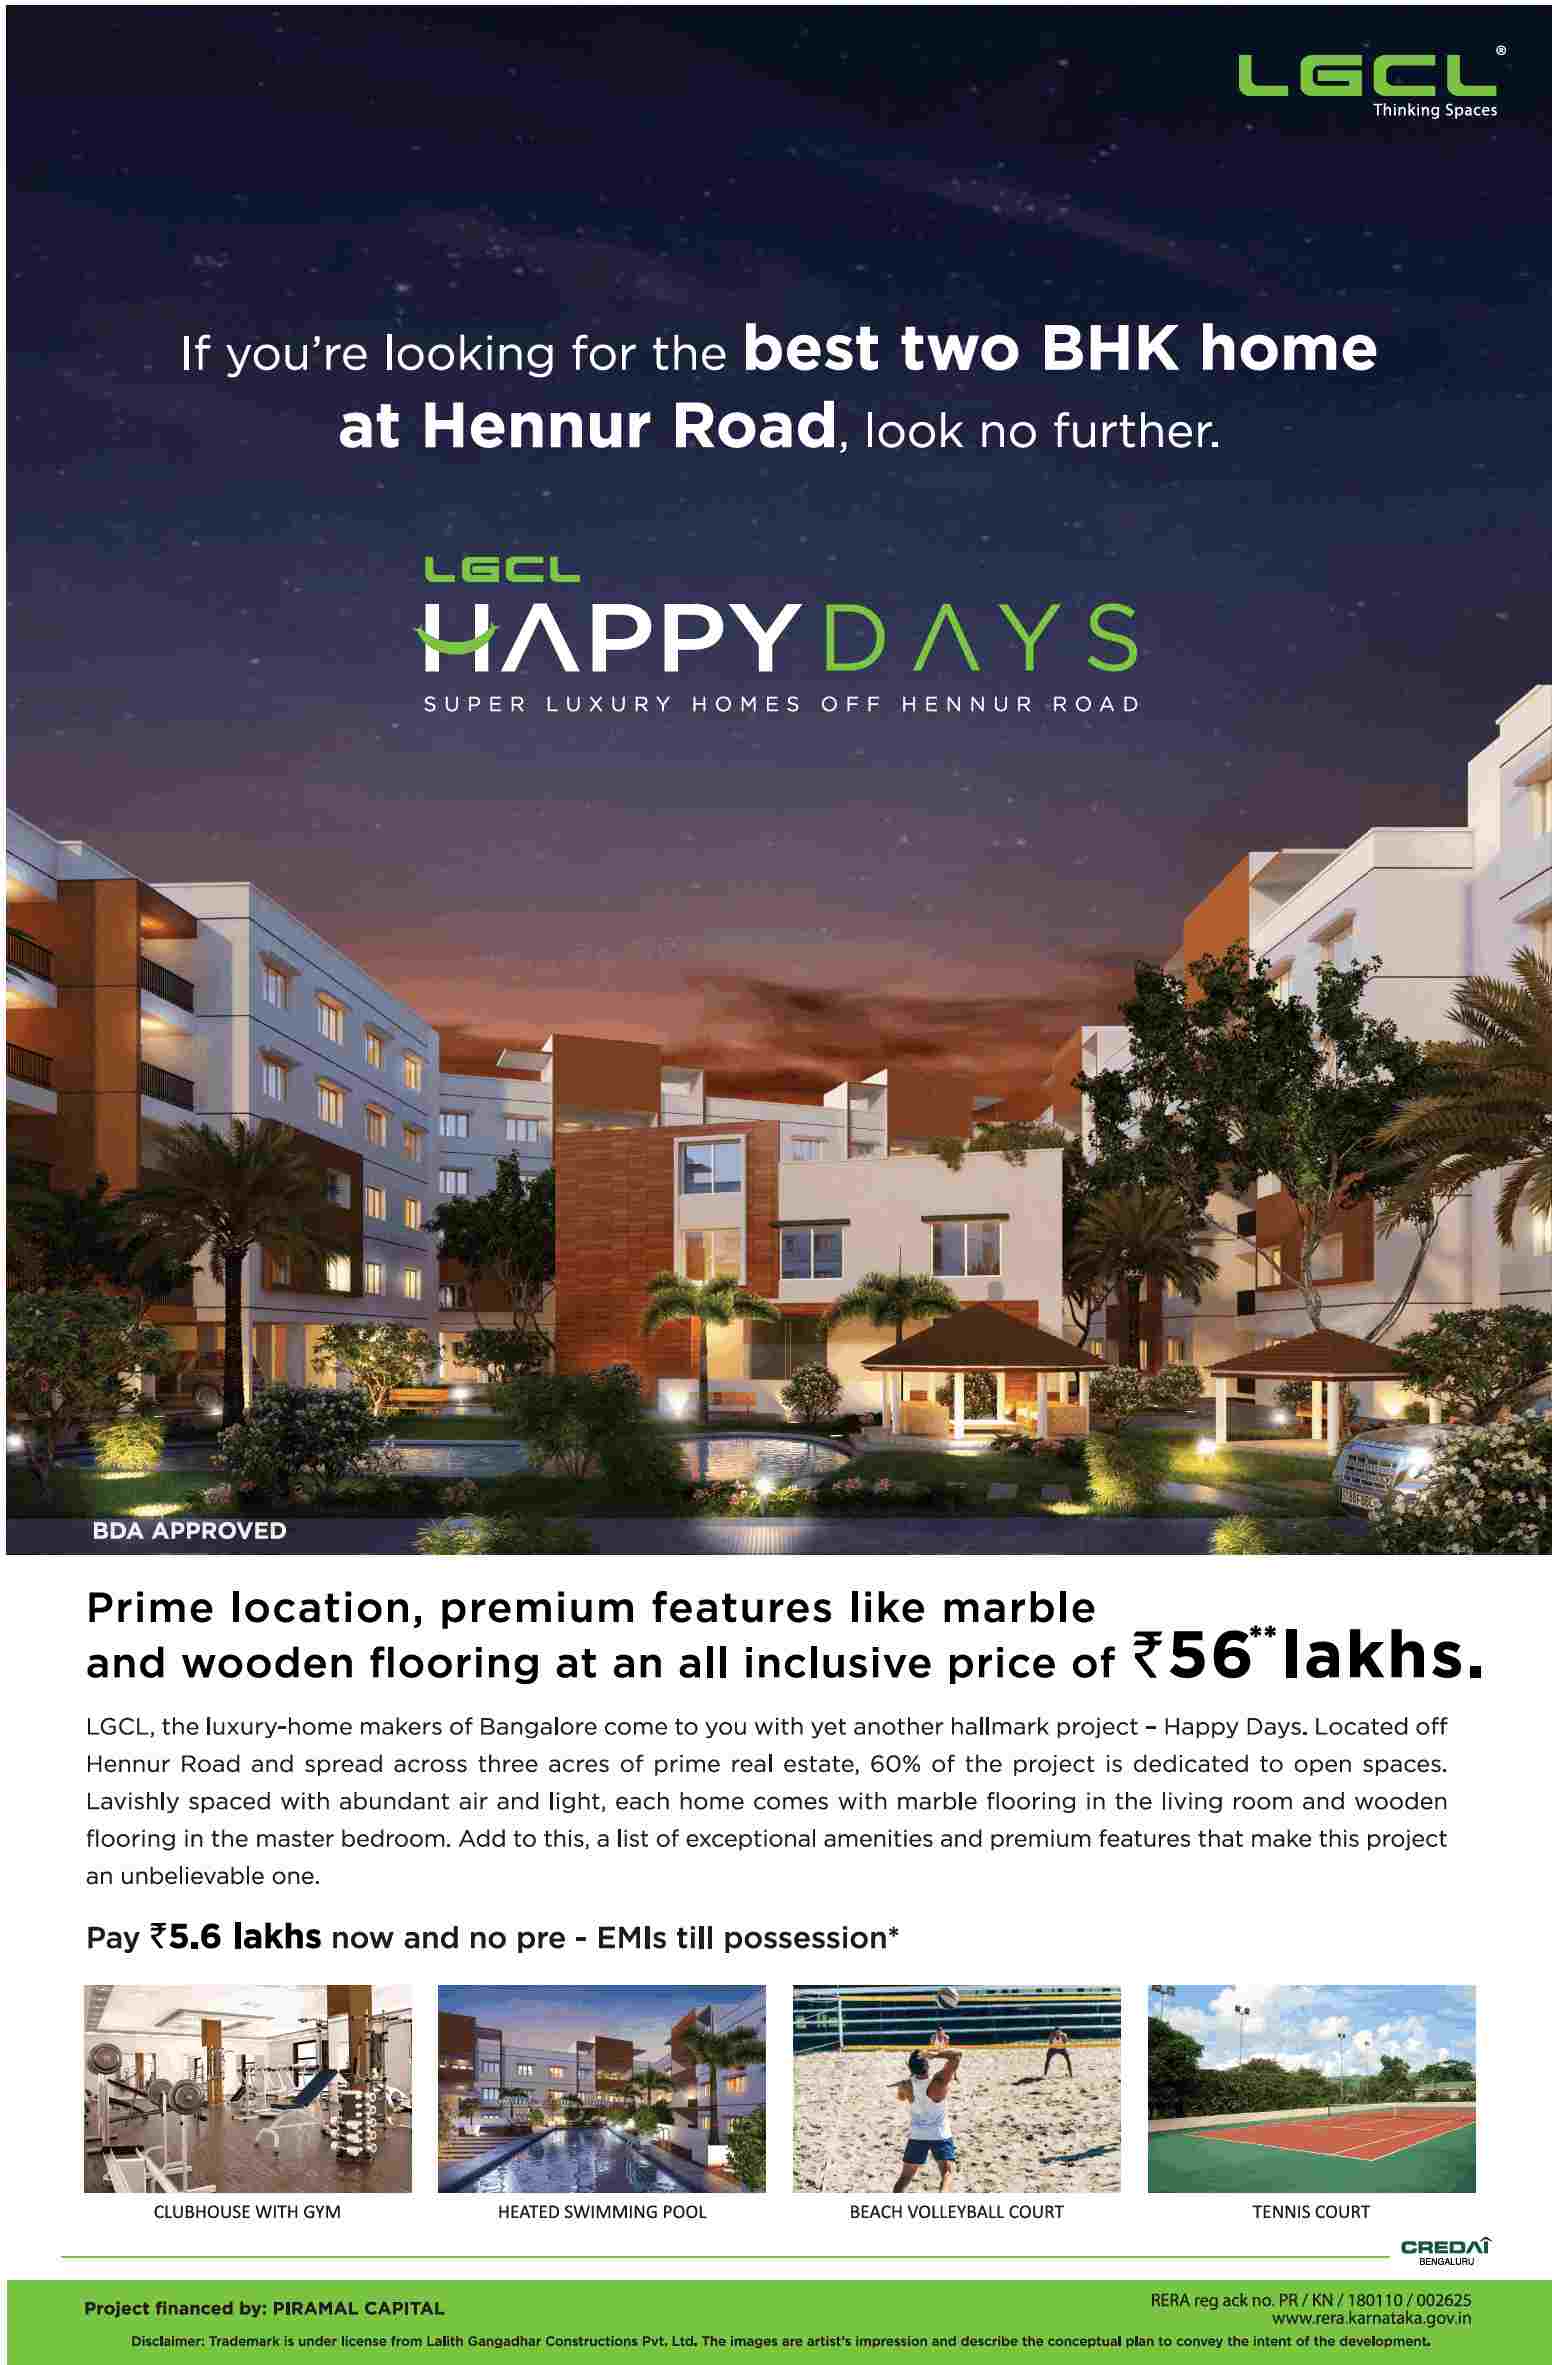 Pay Rs. 5.6 Lakhs now and no pre-EMI till possession at LGCL Happy Days in Bangalore Update